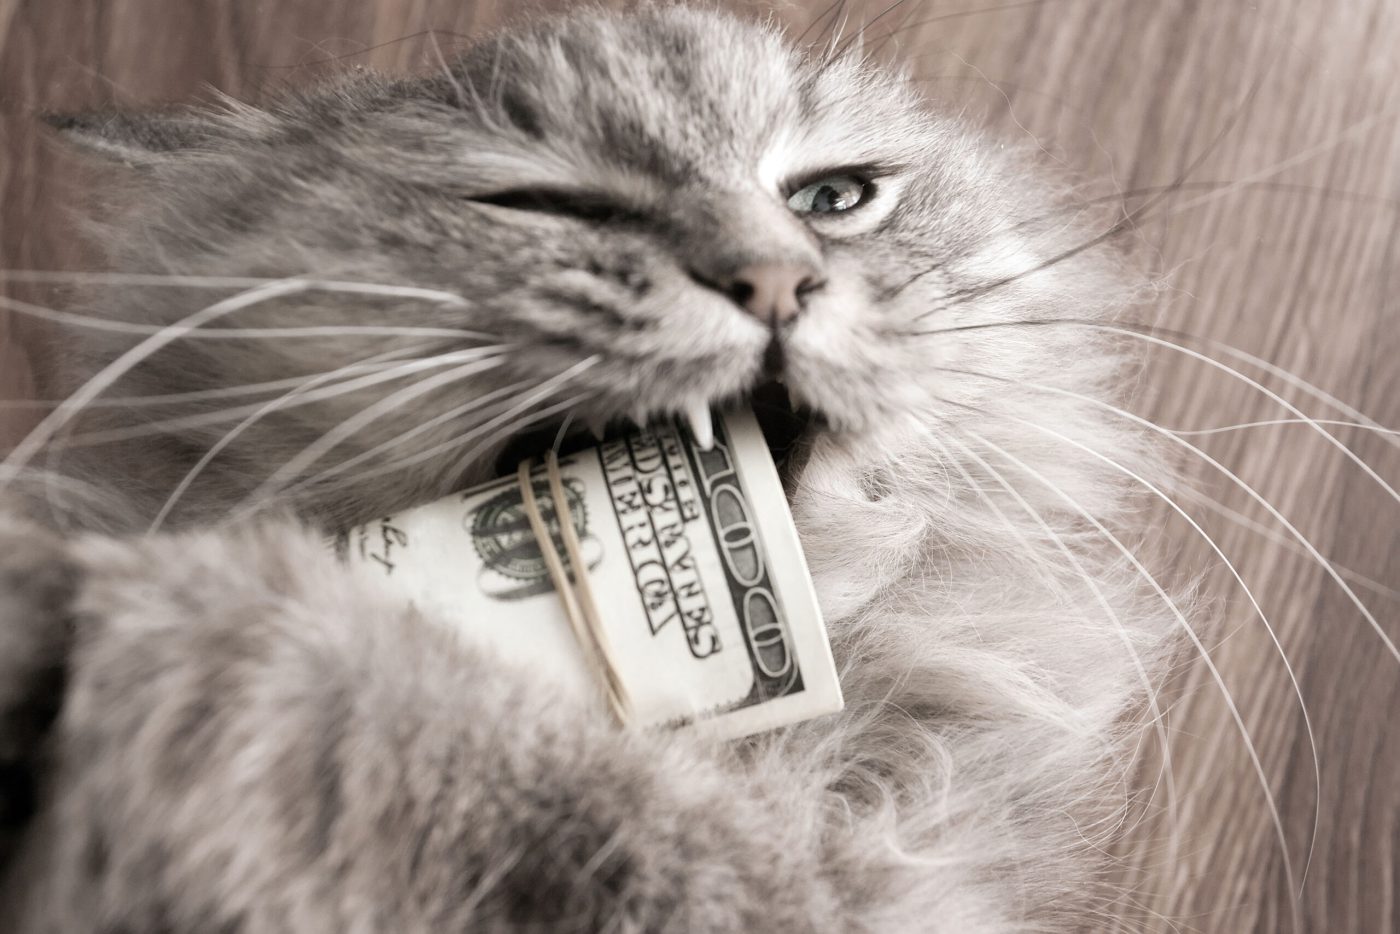 a cat chewing on a wad of bills